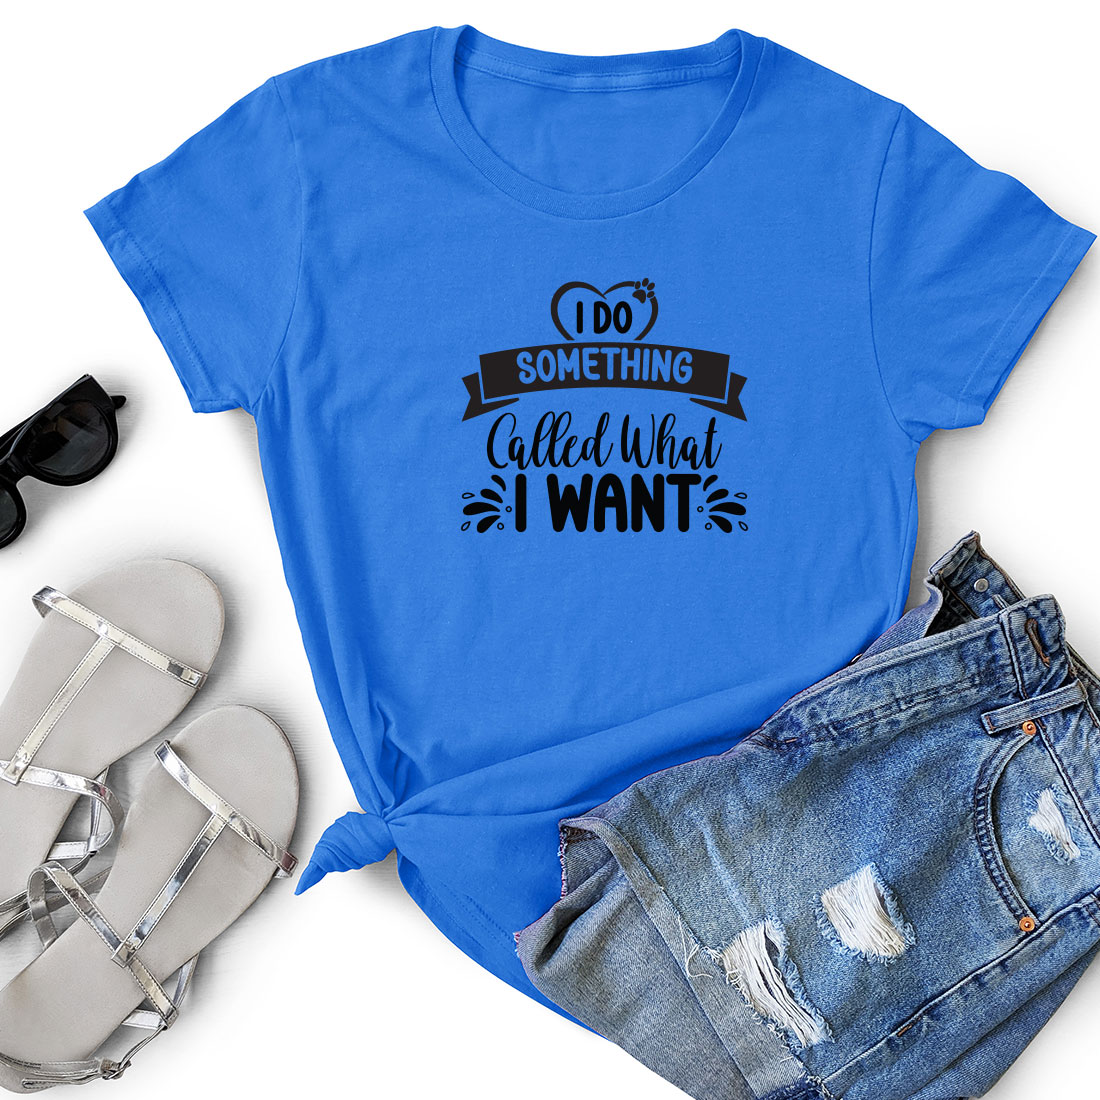 T - shirt that says i do something called what i want.